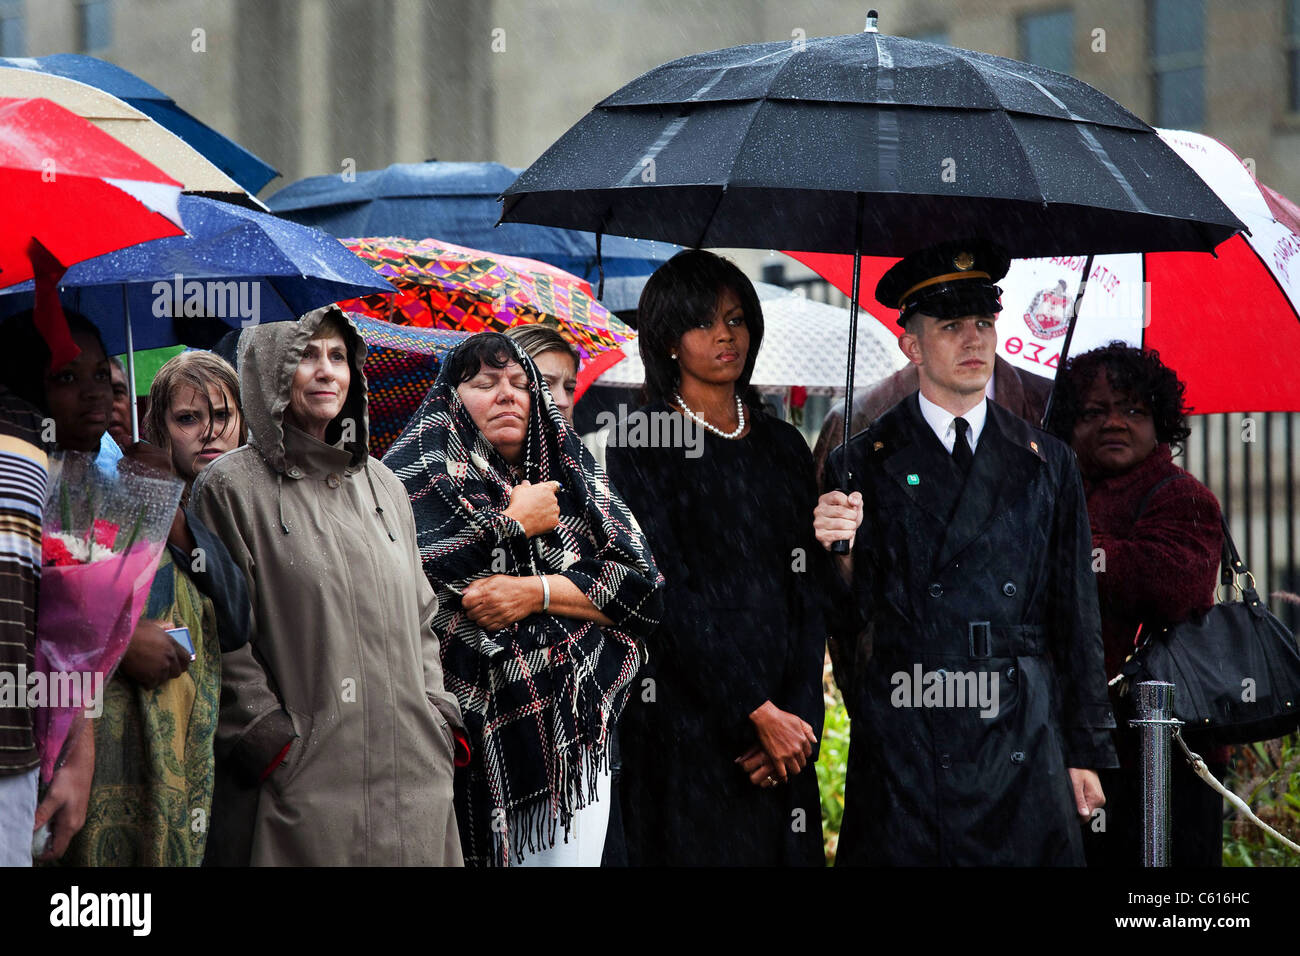 Michelle Obama attends a wreath laying ceremony at the Pentagon on the rainy eighth anniversary of the 9/11 terrorist attacks. Sept. 11 2009., Photo by: Everett Collection(BSLOC_2011_7_108) Stock Photo